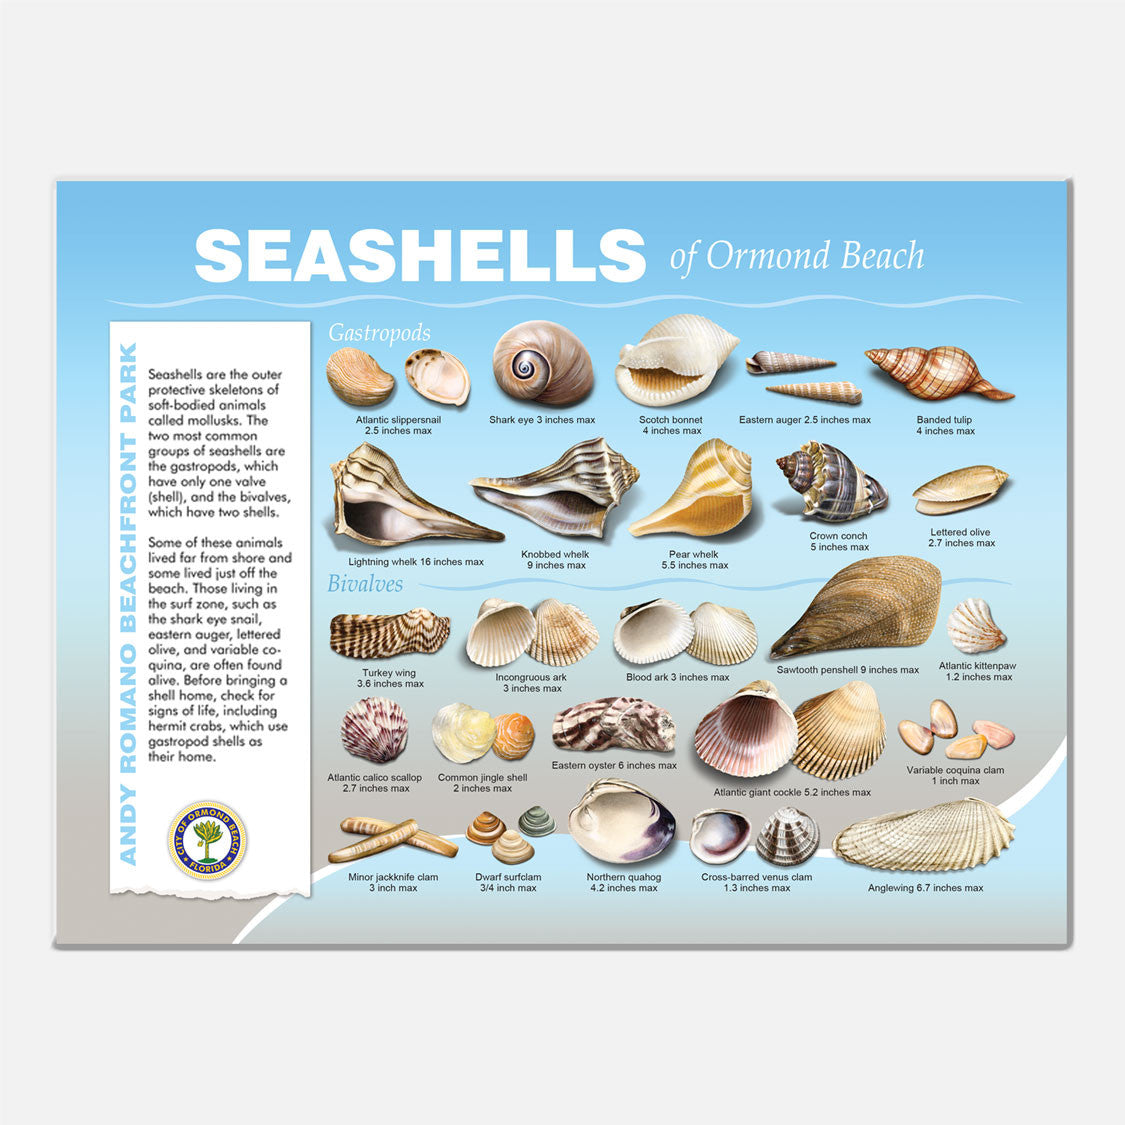 This beautifully illustrated educational display describes and identifies seashells of Andy Romano Beachfront Park, Ormond Beach, Florida.